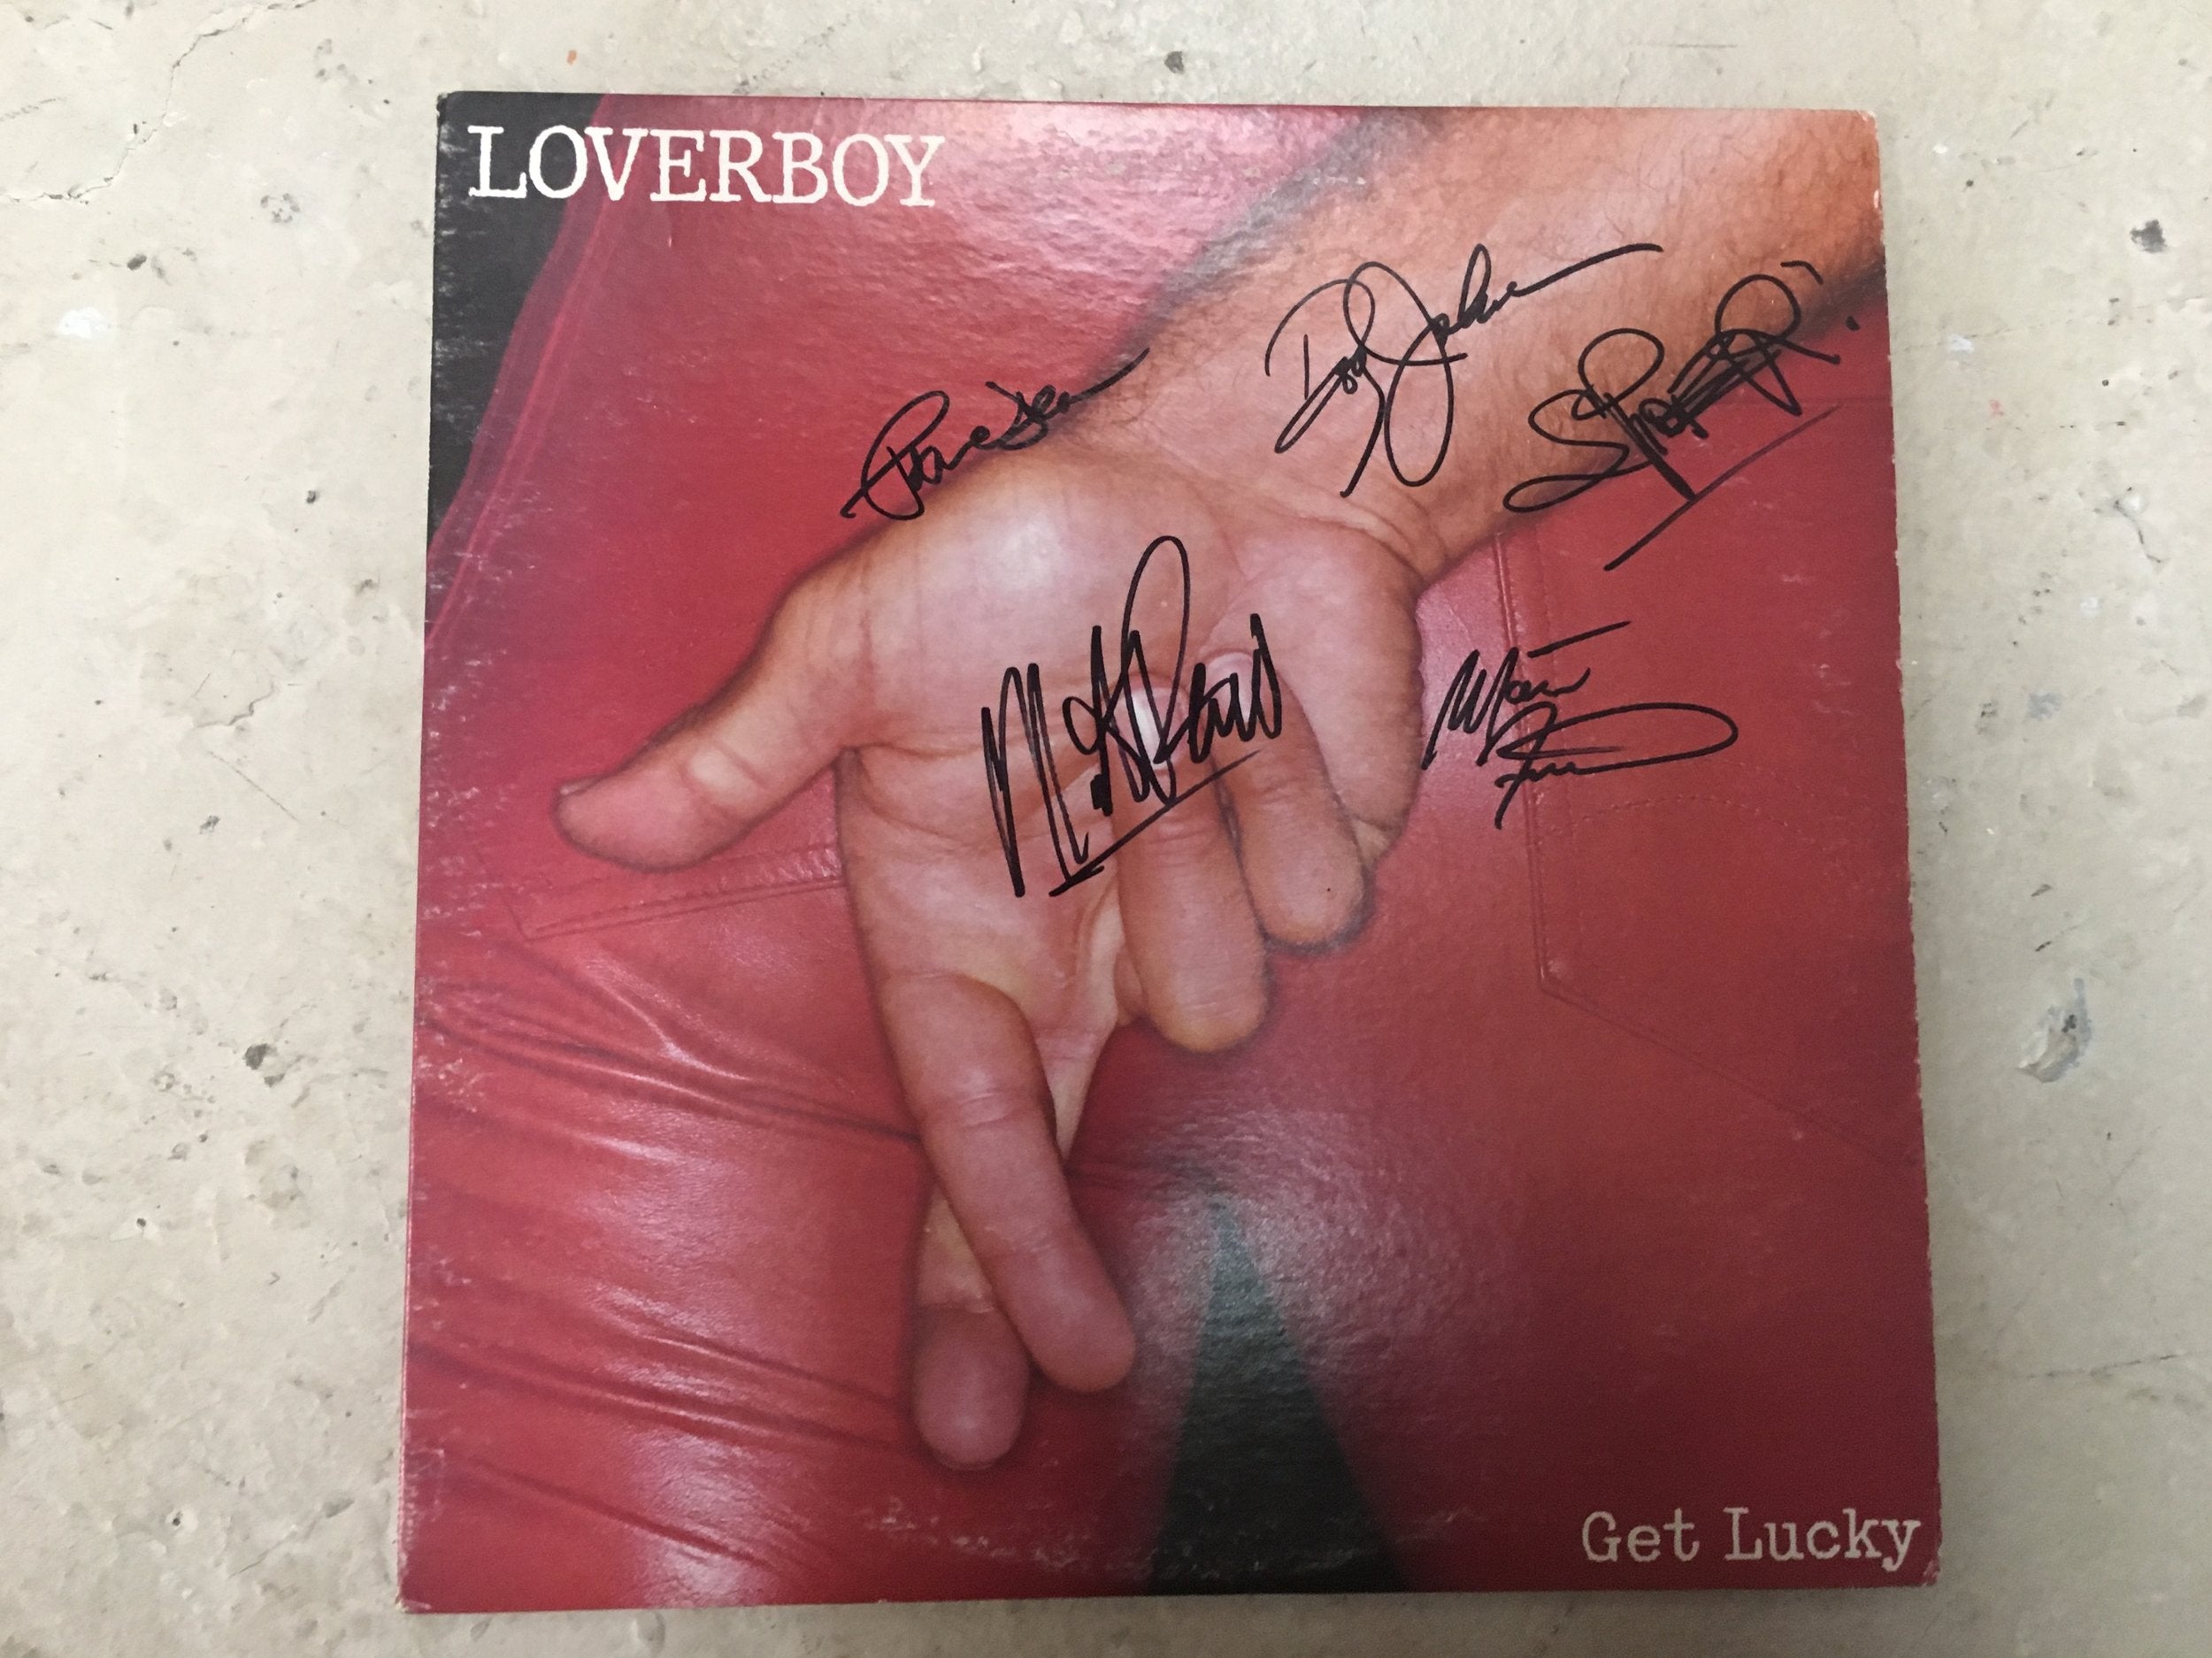 Signed LP record - Get Lucky